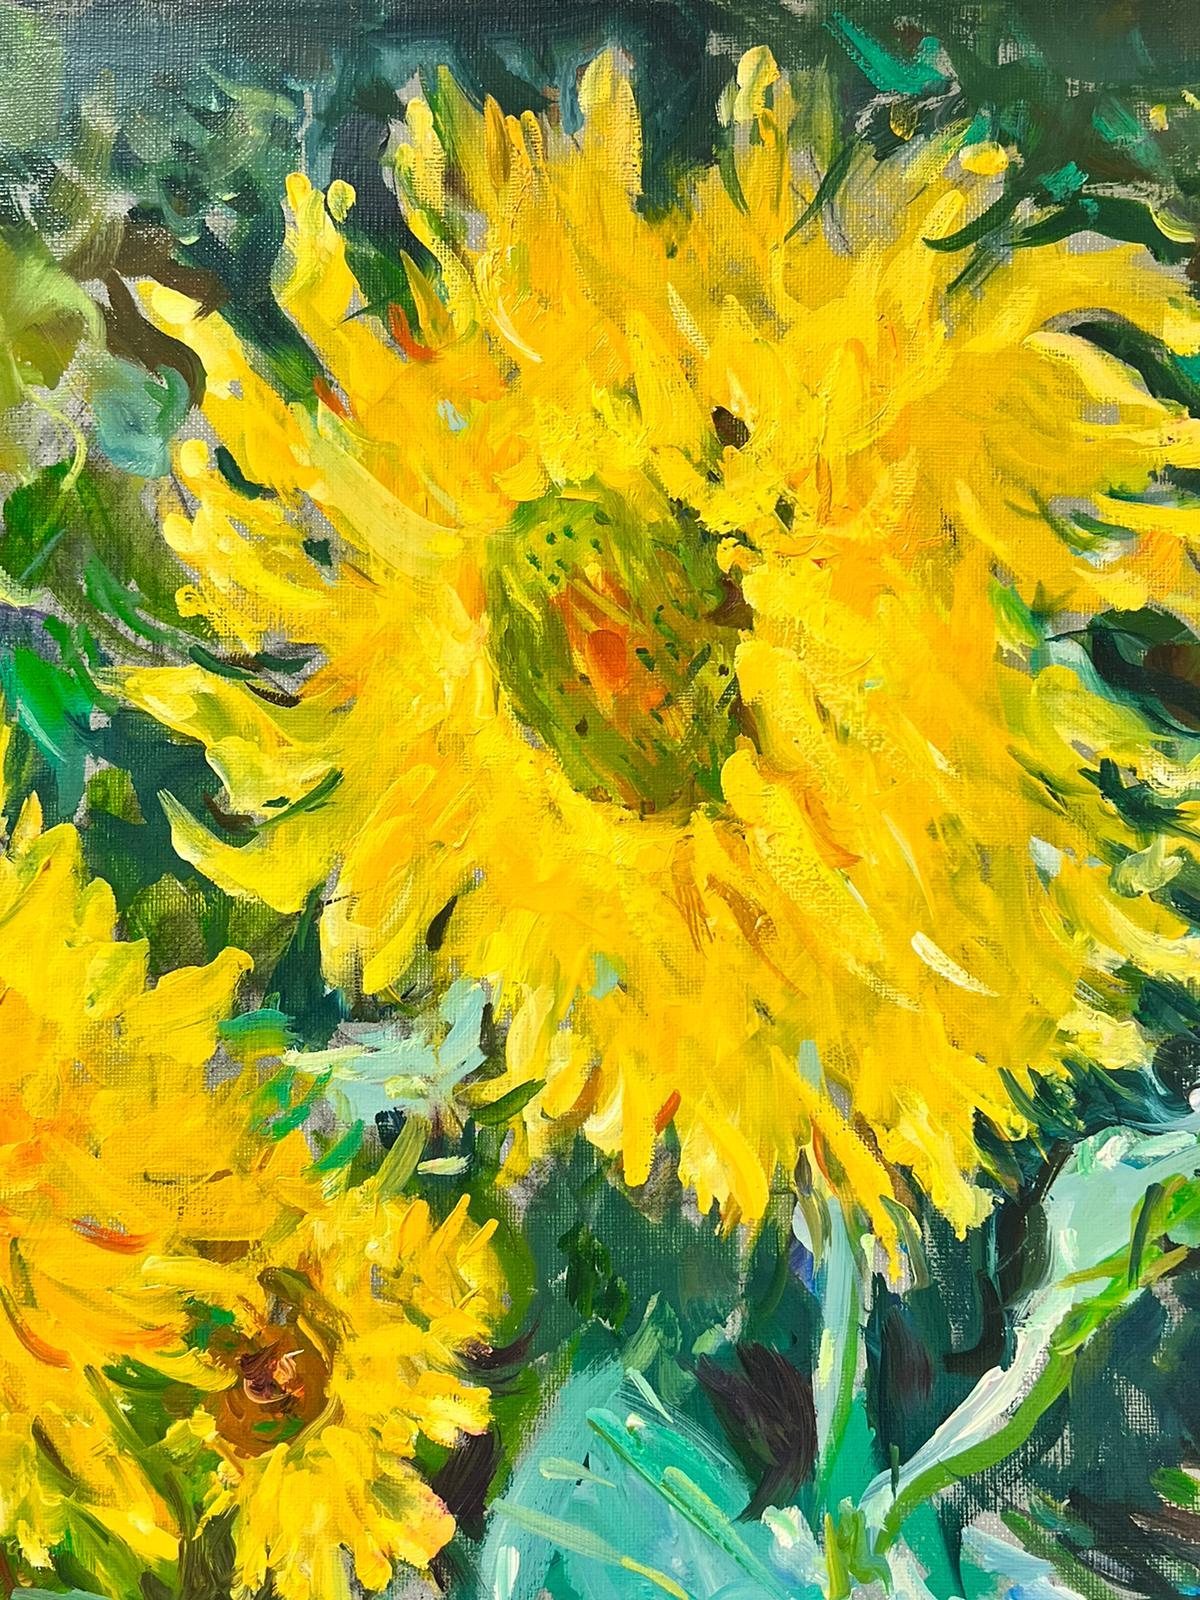 Sunflowers
by Max Agostini (French 1914-1997)
signed oil painting on canvas, unframed
canvas : 24 x 19.5 inches
provenance: private collection, France
condition: very good and sound condition 

Max Agostini was a French artist known for his